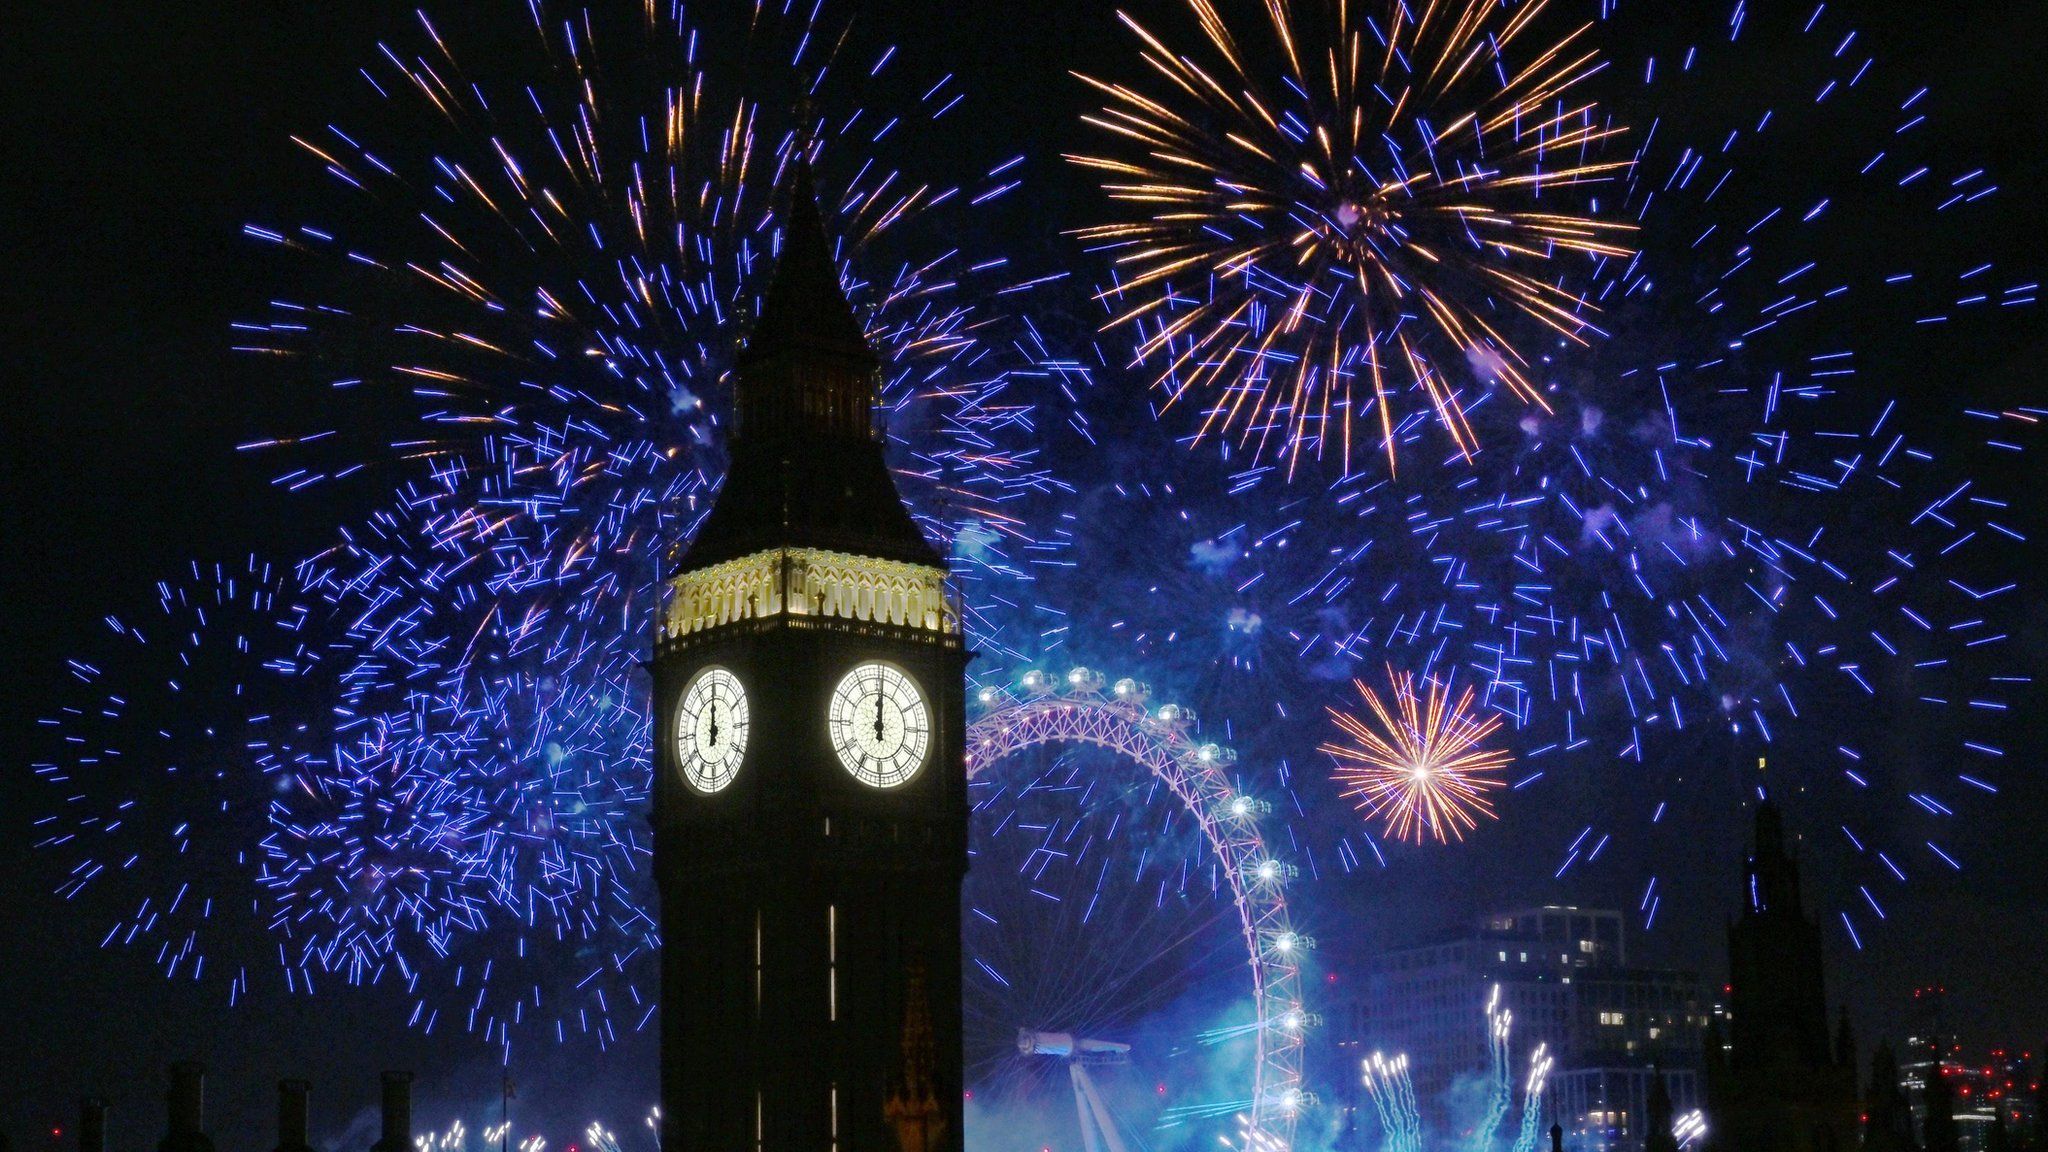 Fireworks light up the sky over Elizabeth Tower, also known as Big Ben and the London Eye in central London during the New Year celebrations